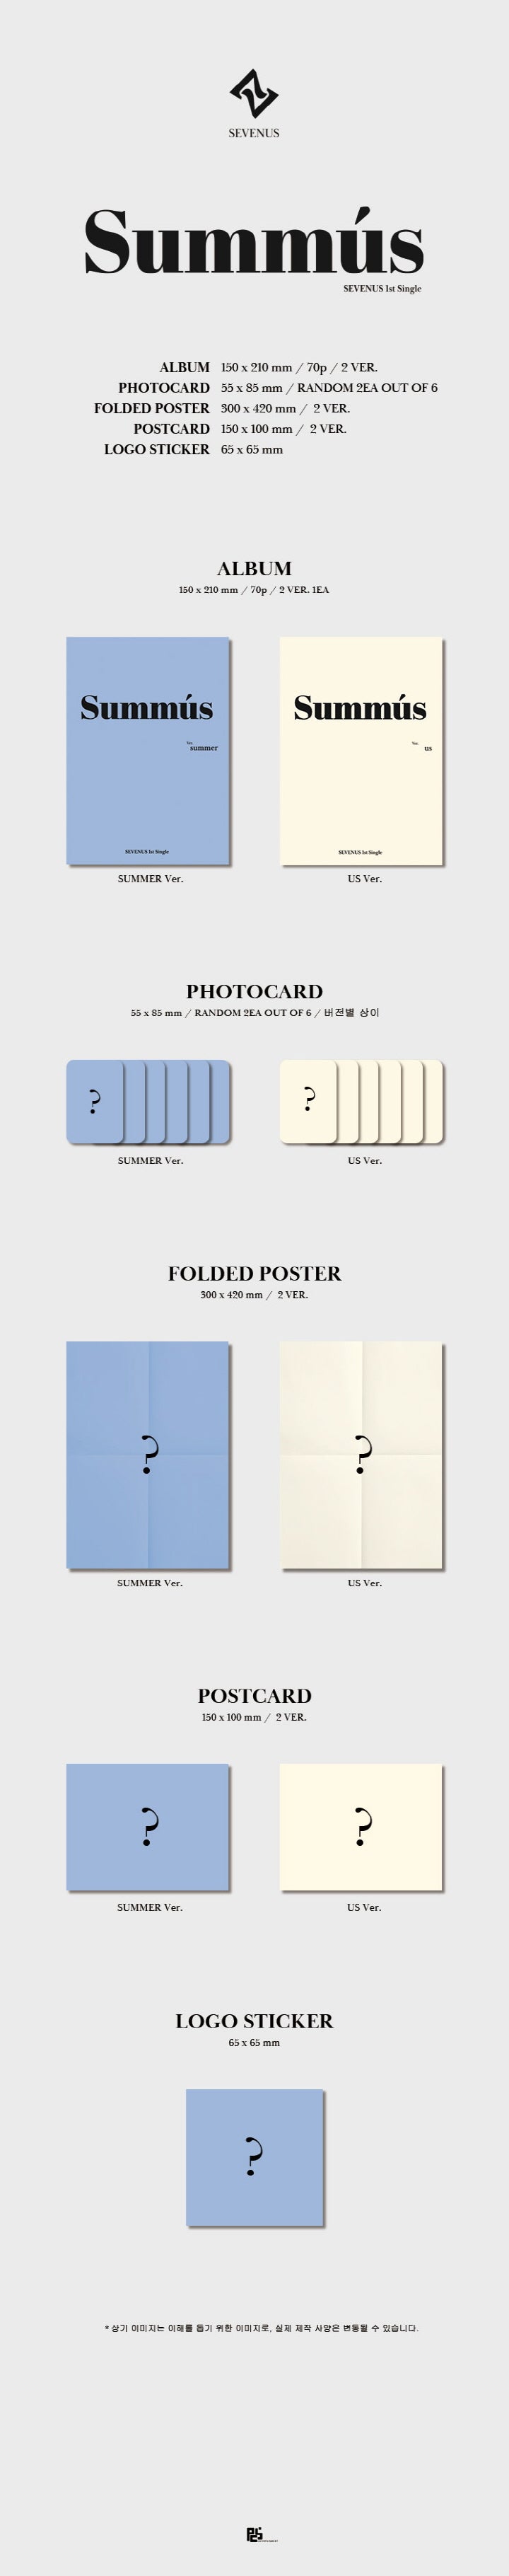 1 CD
1 Photo Book (70 pages)
2 Photo Cards (random out of 6 types)
1 Folded Poster
1 Postcard
1 Logo Sticker